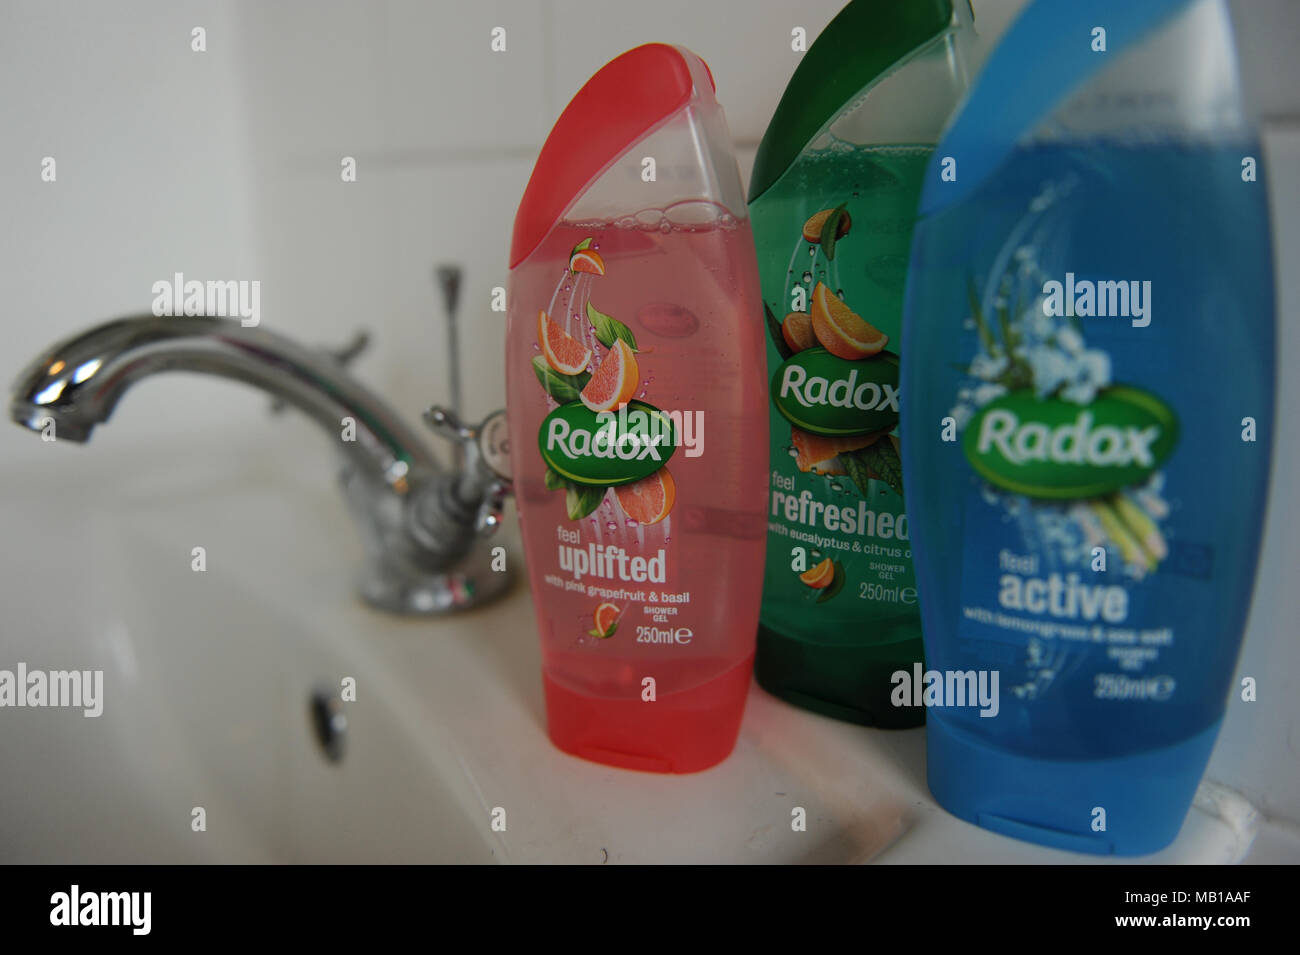 Radox toiletries lined up in a bathroom Stock Photo